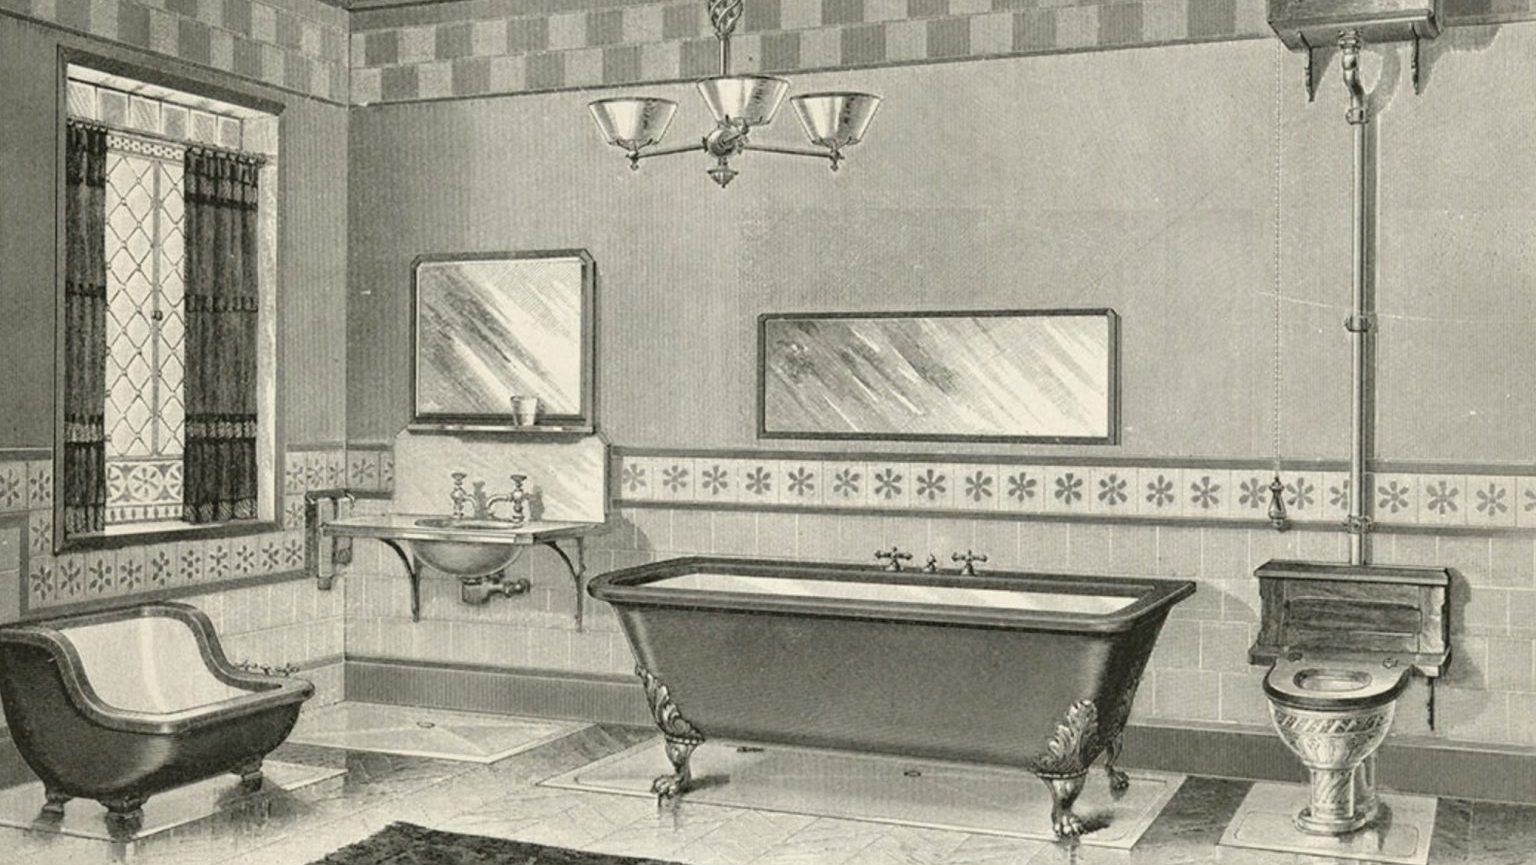 An old black and white photograph of a bathroom.